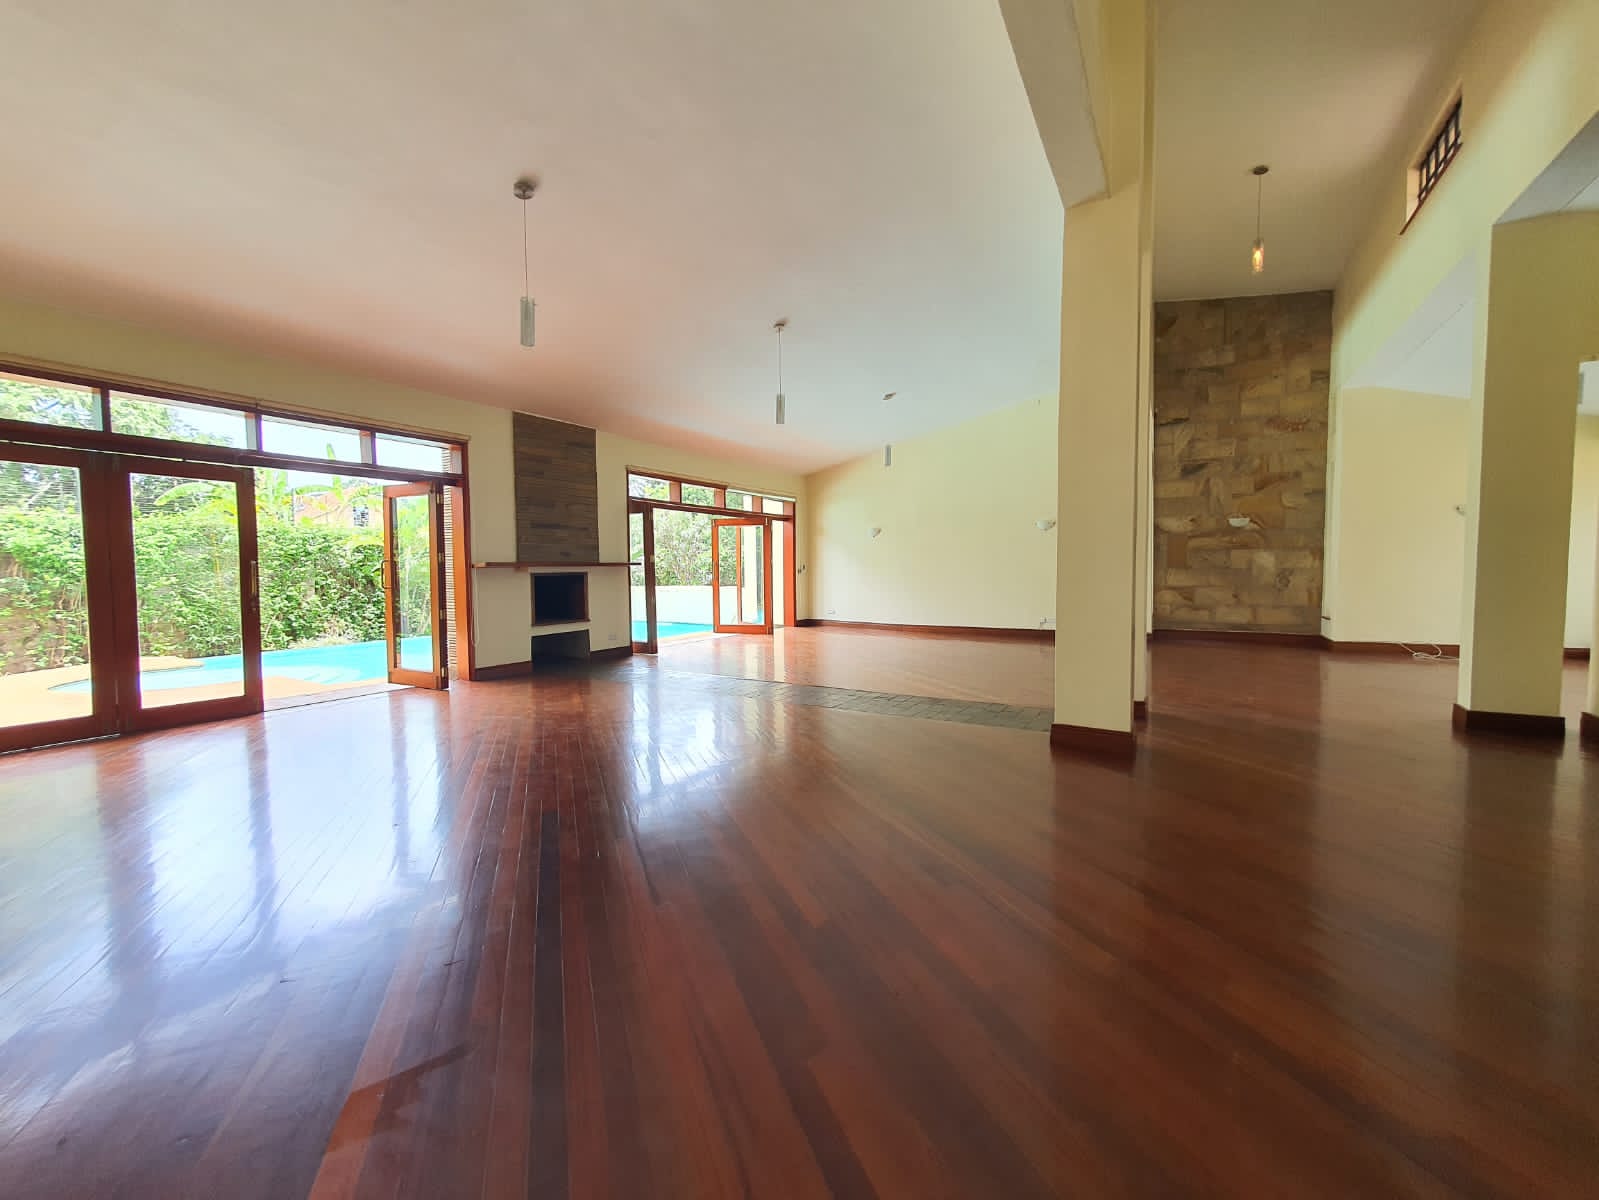 Beautiful 4 bedroom home on a half acre plot available to let. close proximity to Schools, the UN offices in Nairobi, Village Market, Two Rivers Mall Musilli Homes